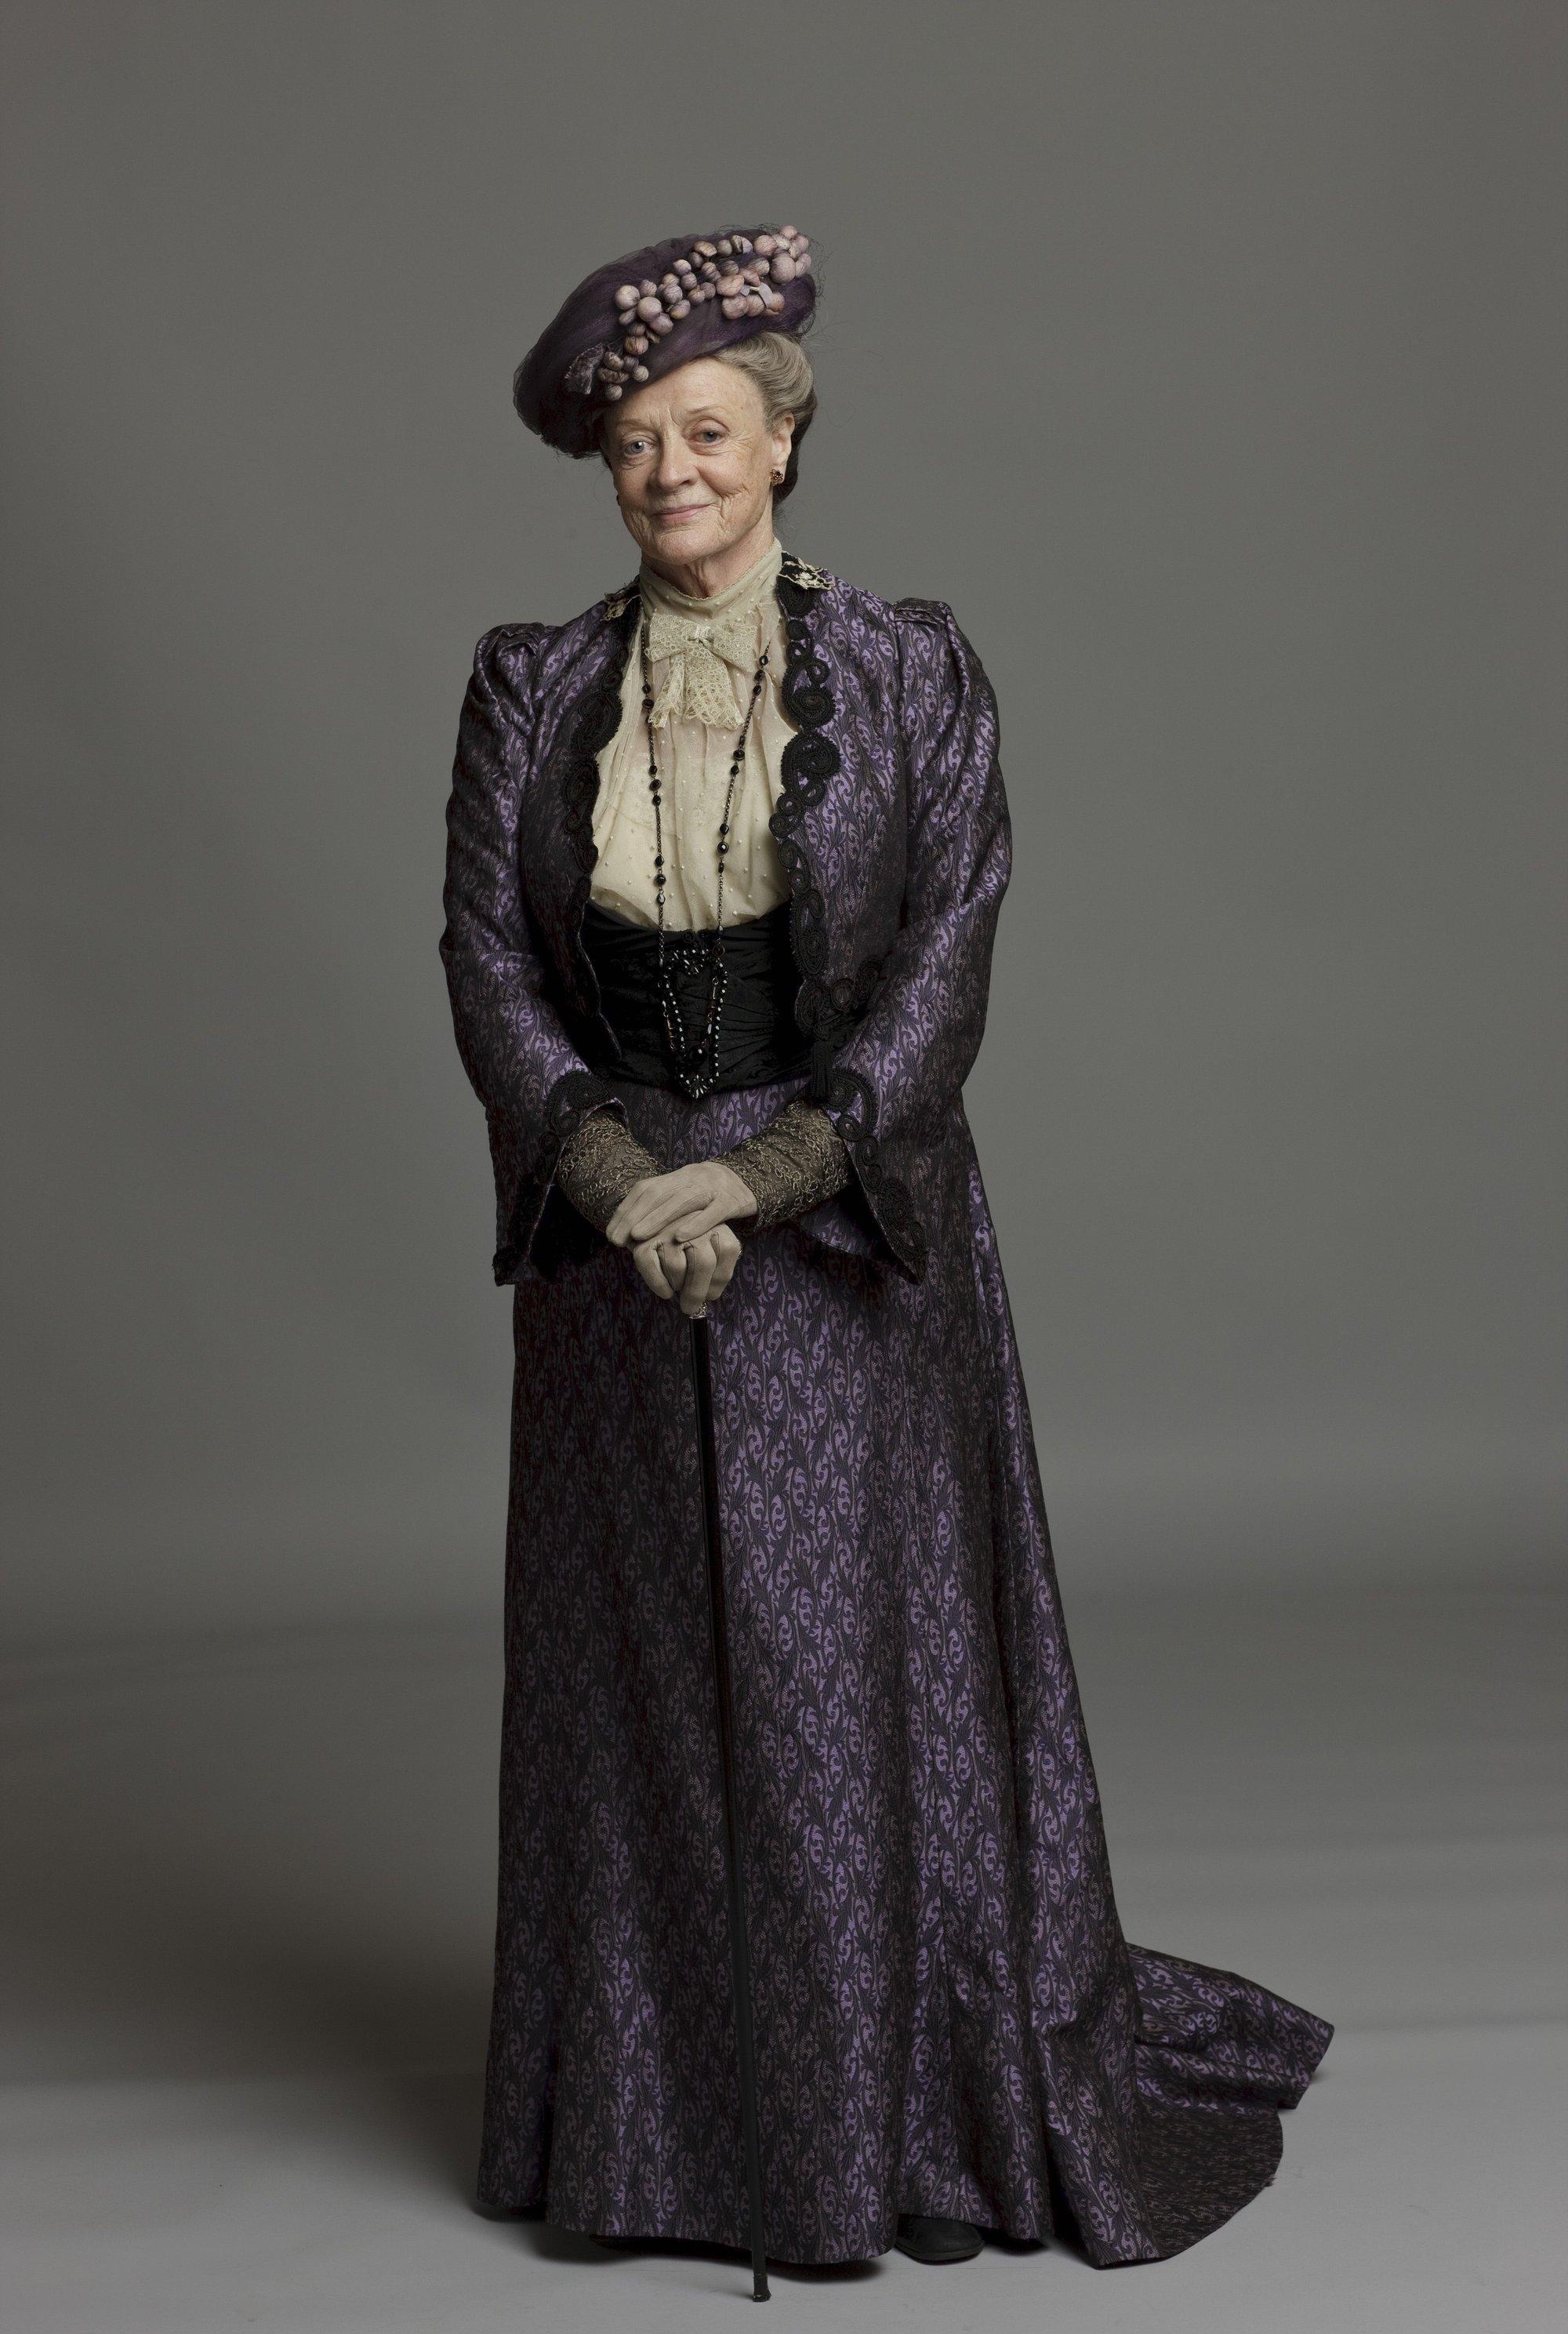 Maggie Smith Wallpapers (31+ images inside)